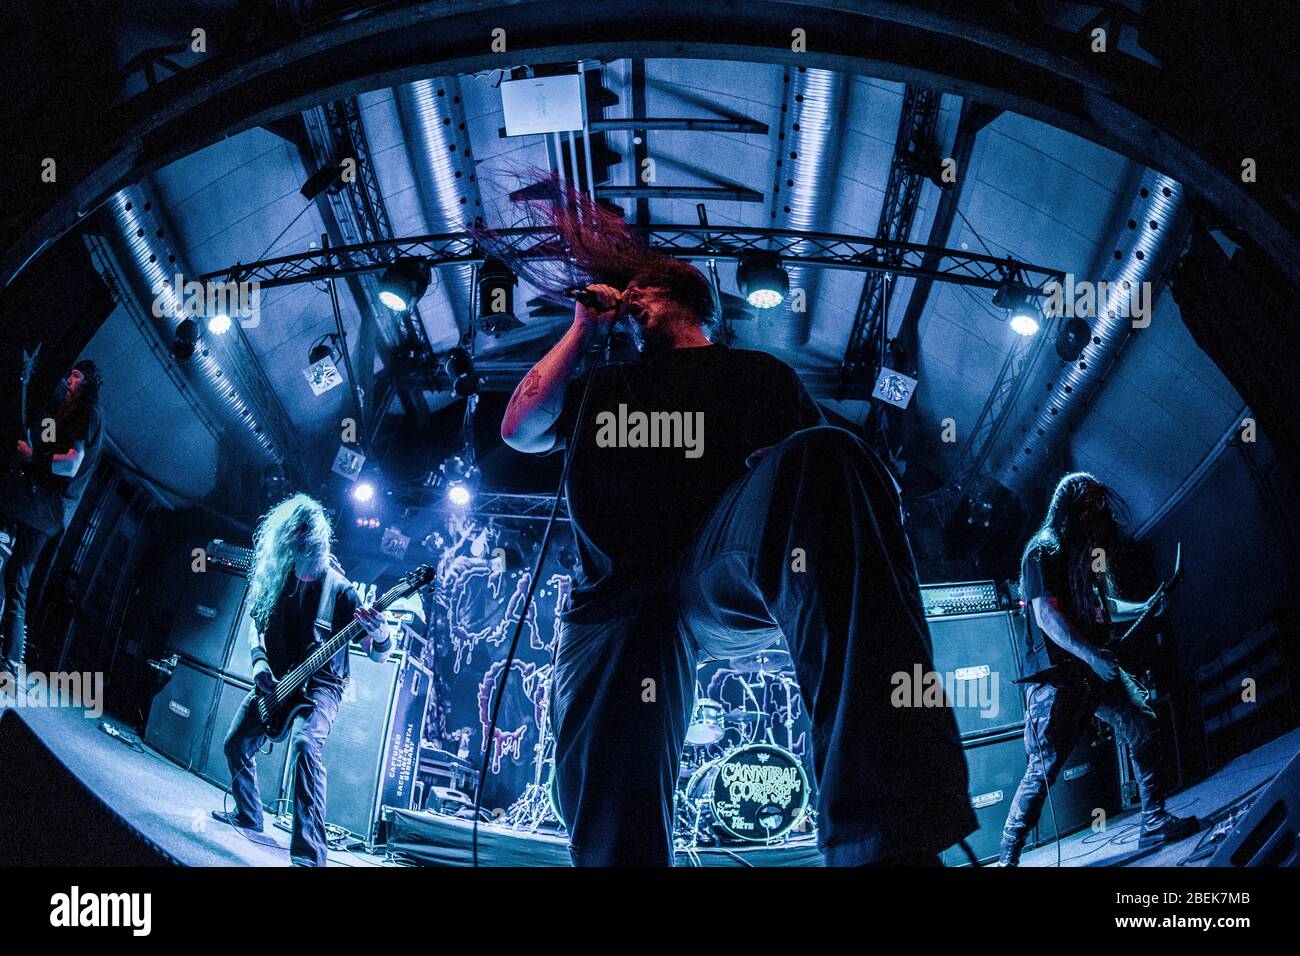 Kolding, Denmark. 15th, February 2018. The American death metal band Cannibal Corpse performs a live concert at Godset in Kolding. Here vocalist George Fisher a.k.a. Corpsgrinder is seen live on stage. (Photo credit: Gonzales Photo - Lasse Lagoni). Stock Photo